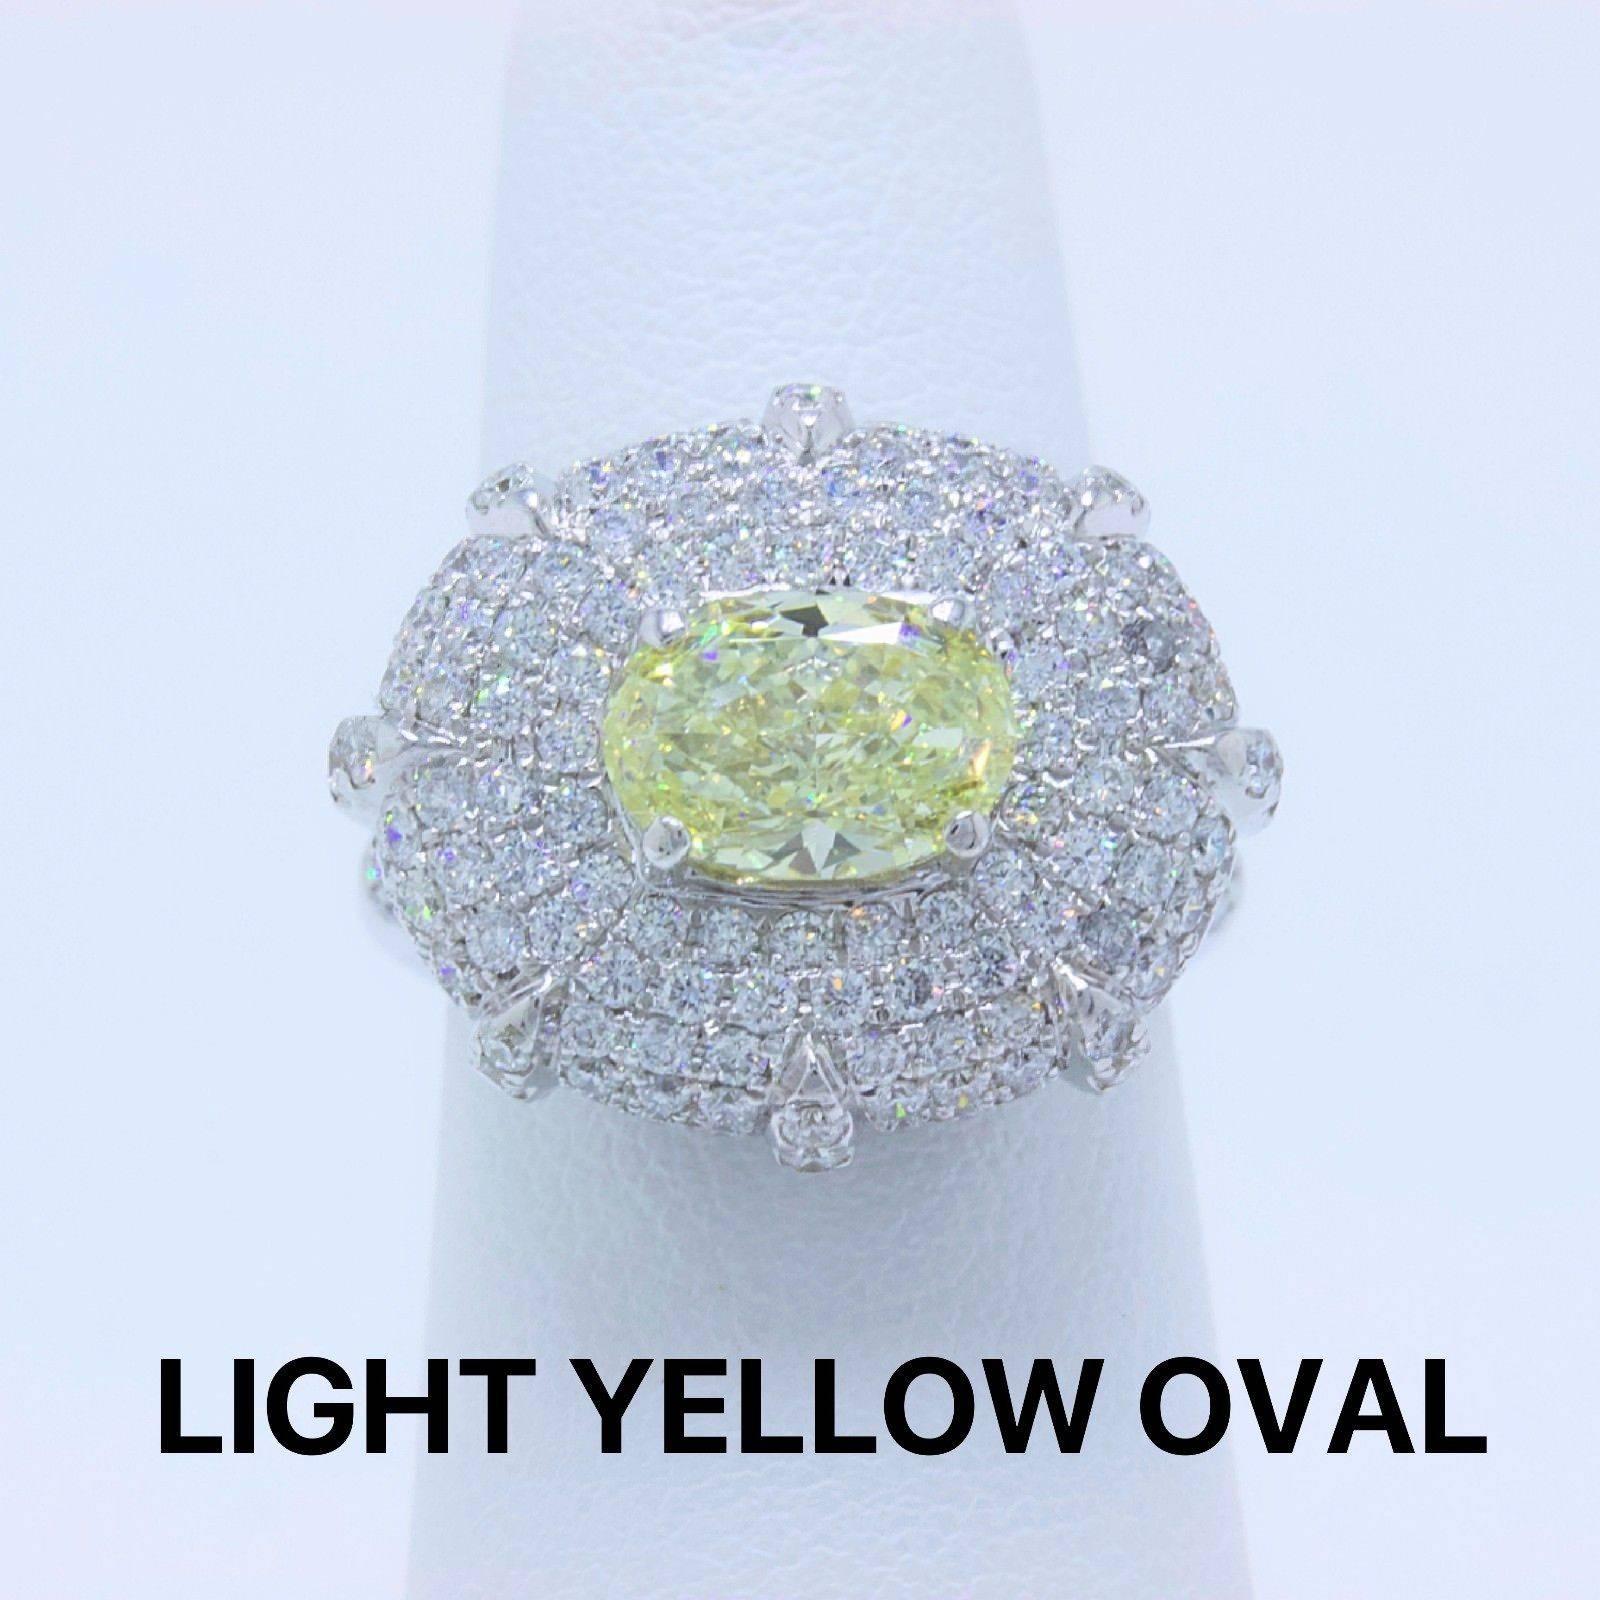 Light Yellow Oval 4.24 TCW Diamond Engagement Cocktail Ring in 18k White Gold In Excellent Condition For Sale In San Diego, CA